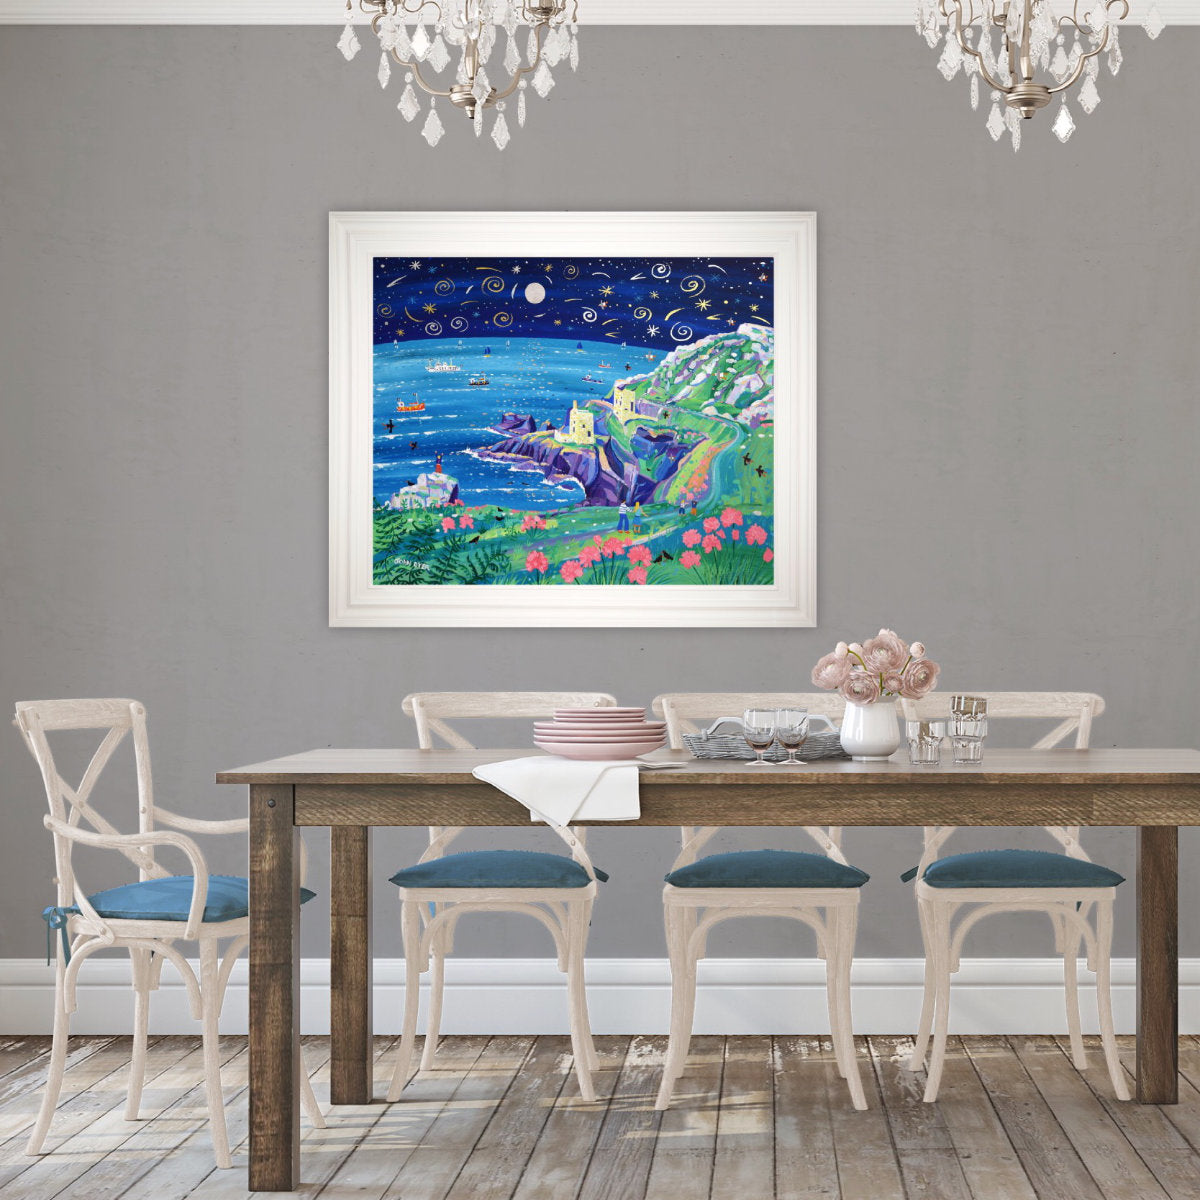 &#39;Shooting Stars over Botallack&#39;. 33 x 40 inches original art acrylic on board. Paintings of Cornwall by Cornish Artist John Dyer from our Cornwall Art Gallery